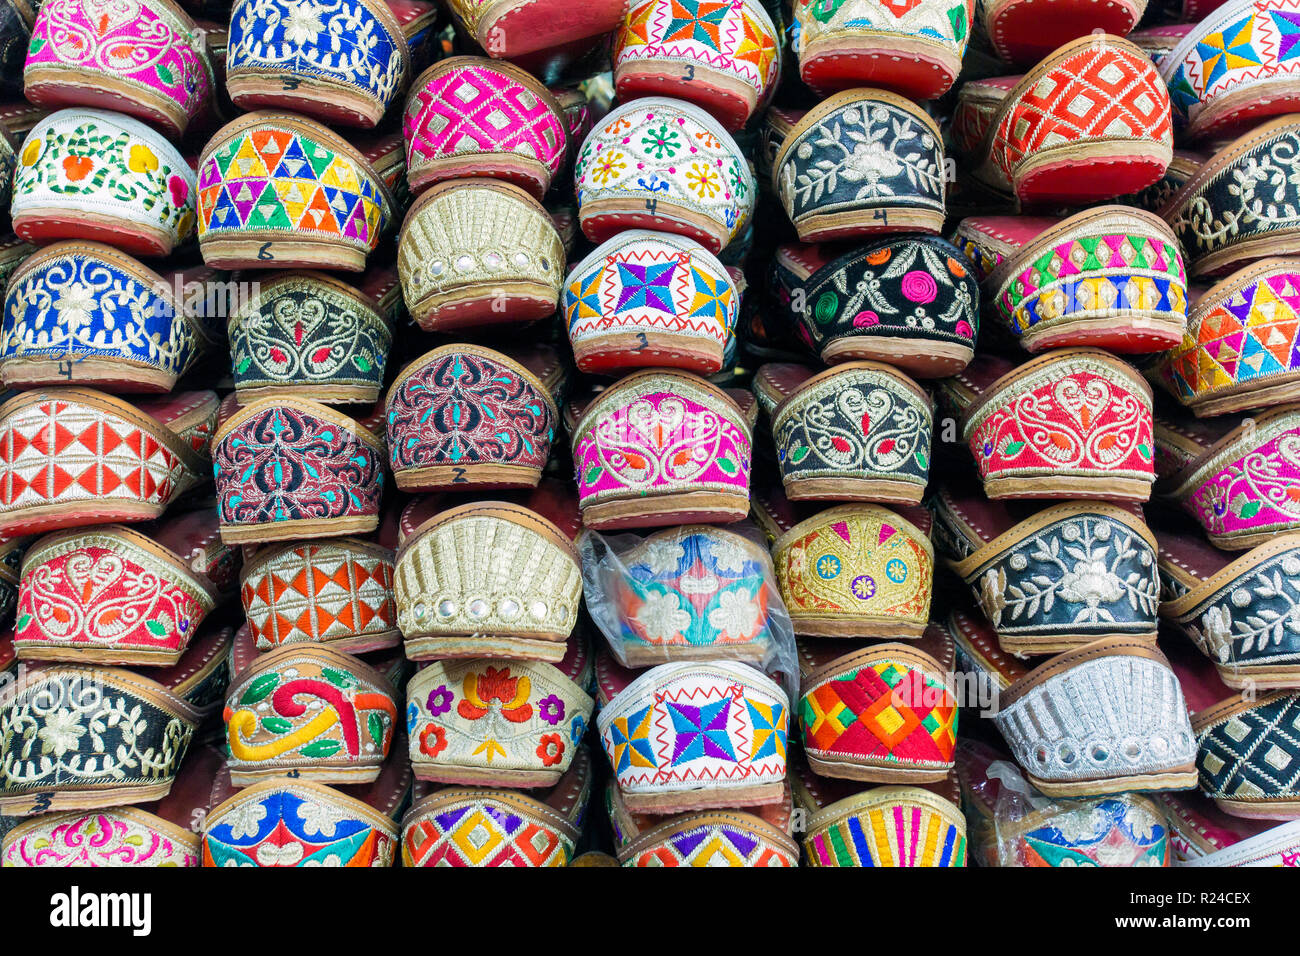 Traditional Indian slippers for sale, Amritsar, Punjab, India, Asia Stock Photo